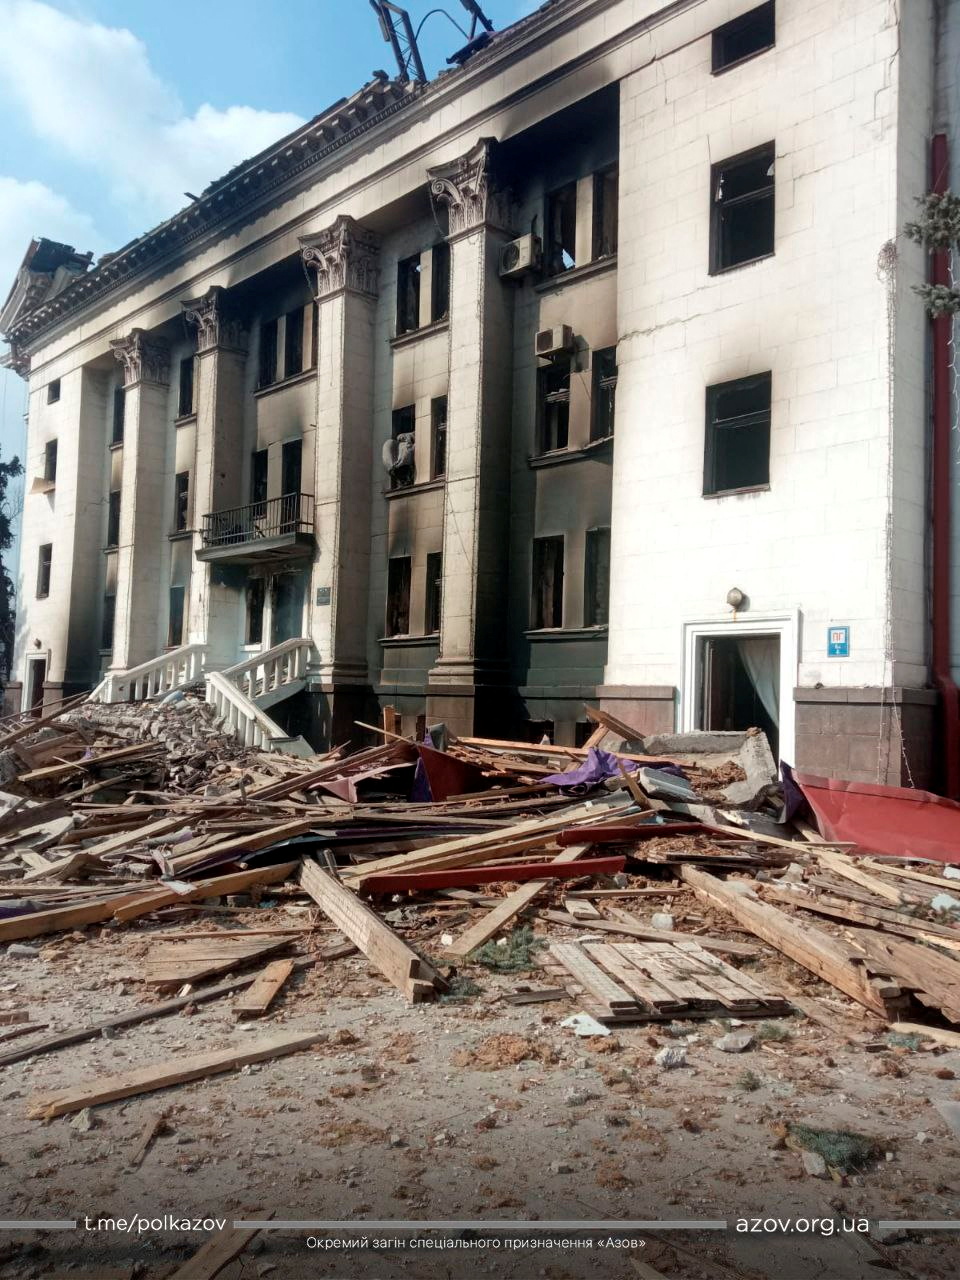 General view of the remains of the drama theatre which was hit by a bomb in Mariupol